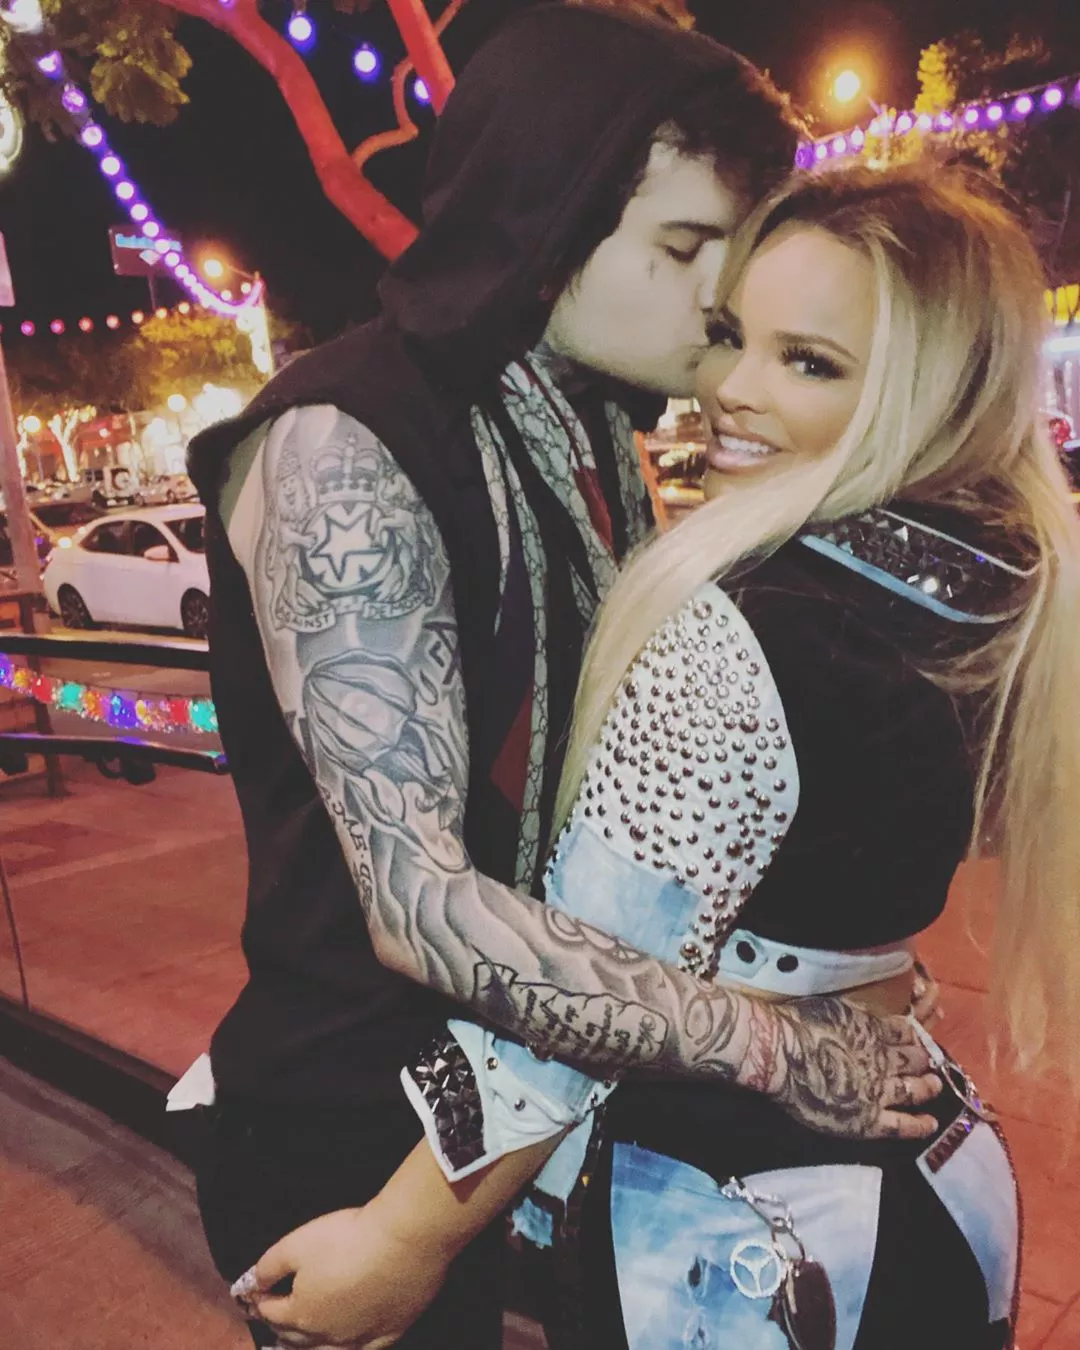 Trisha Paytas, Controversial r, Posts Instagram Video with Jon Hill